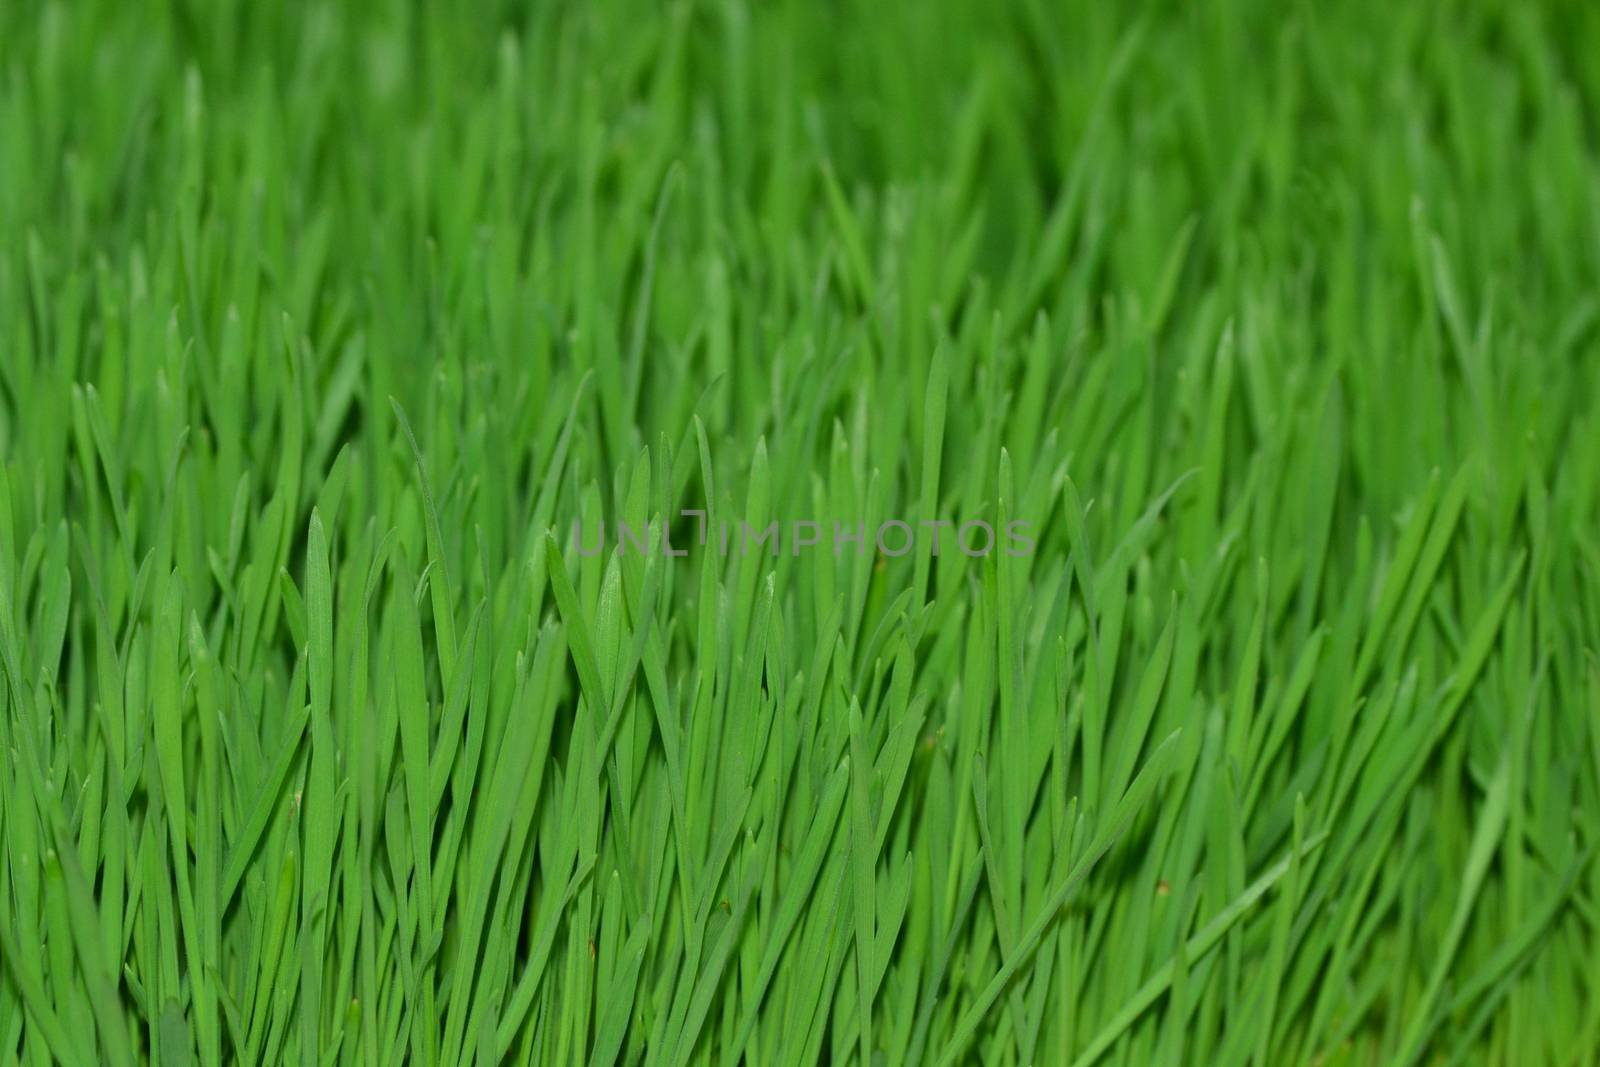  Wheatgrass by ideation90